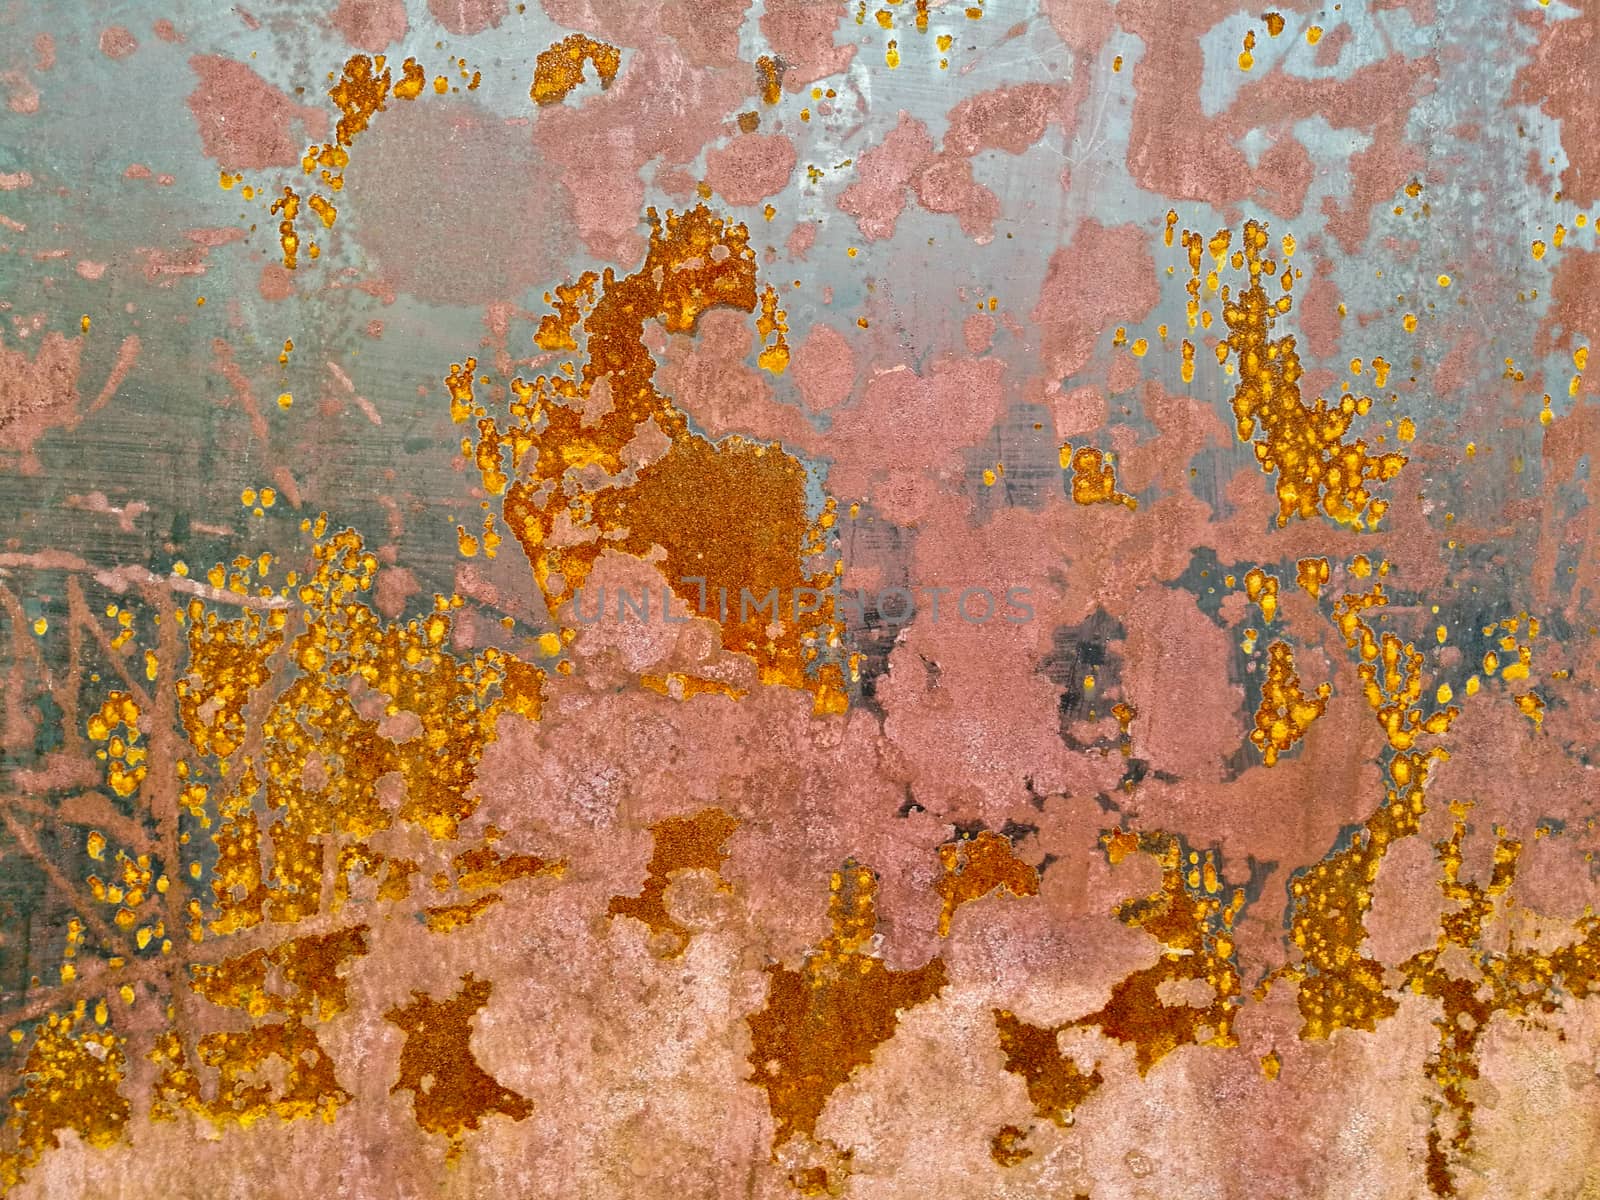 Rustic stain yellow orange red metal sheet industrial background